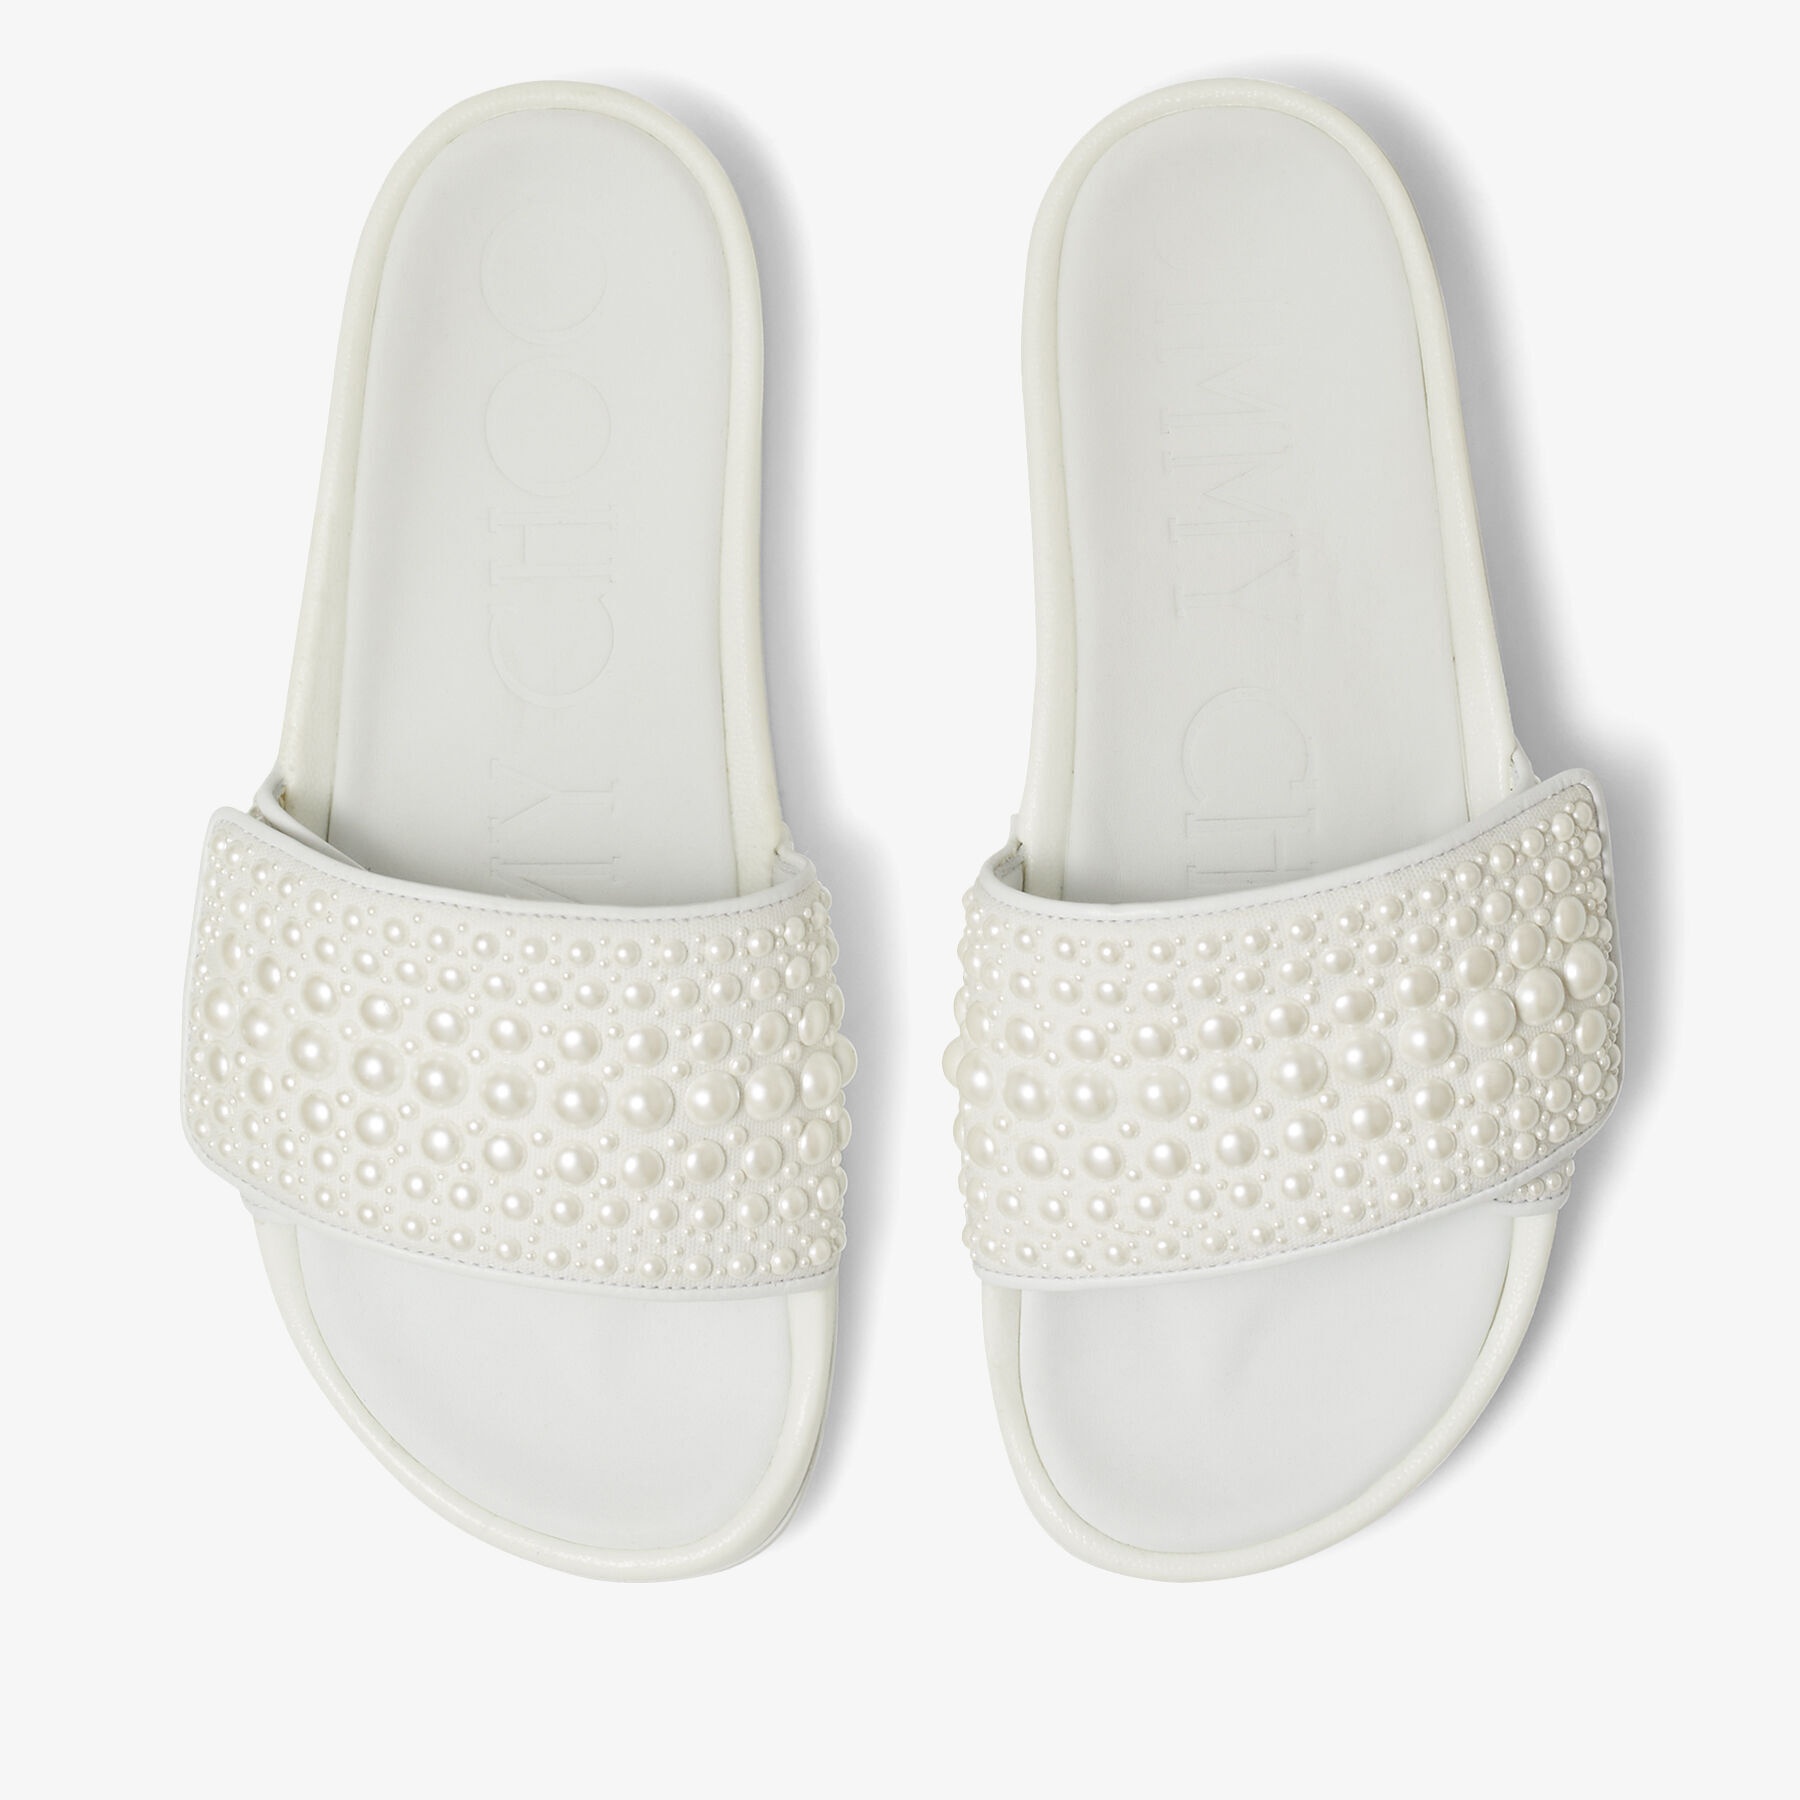 Fitz/F
White Canvas and Leather Slides with Pearls - 5